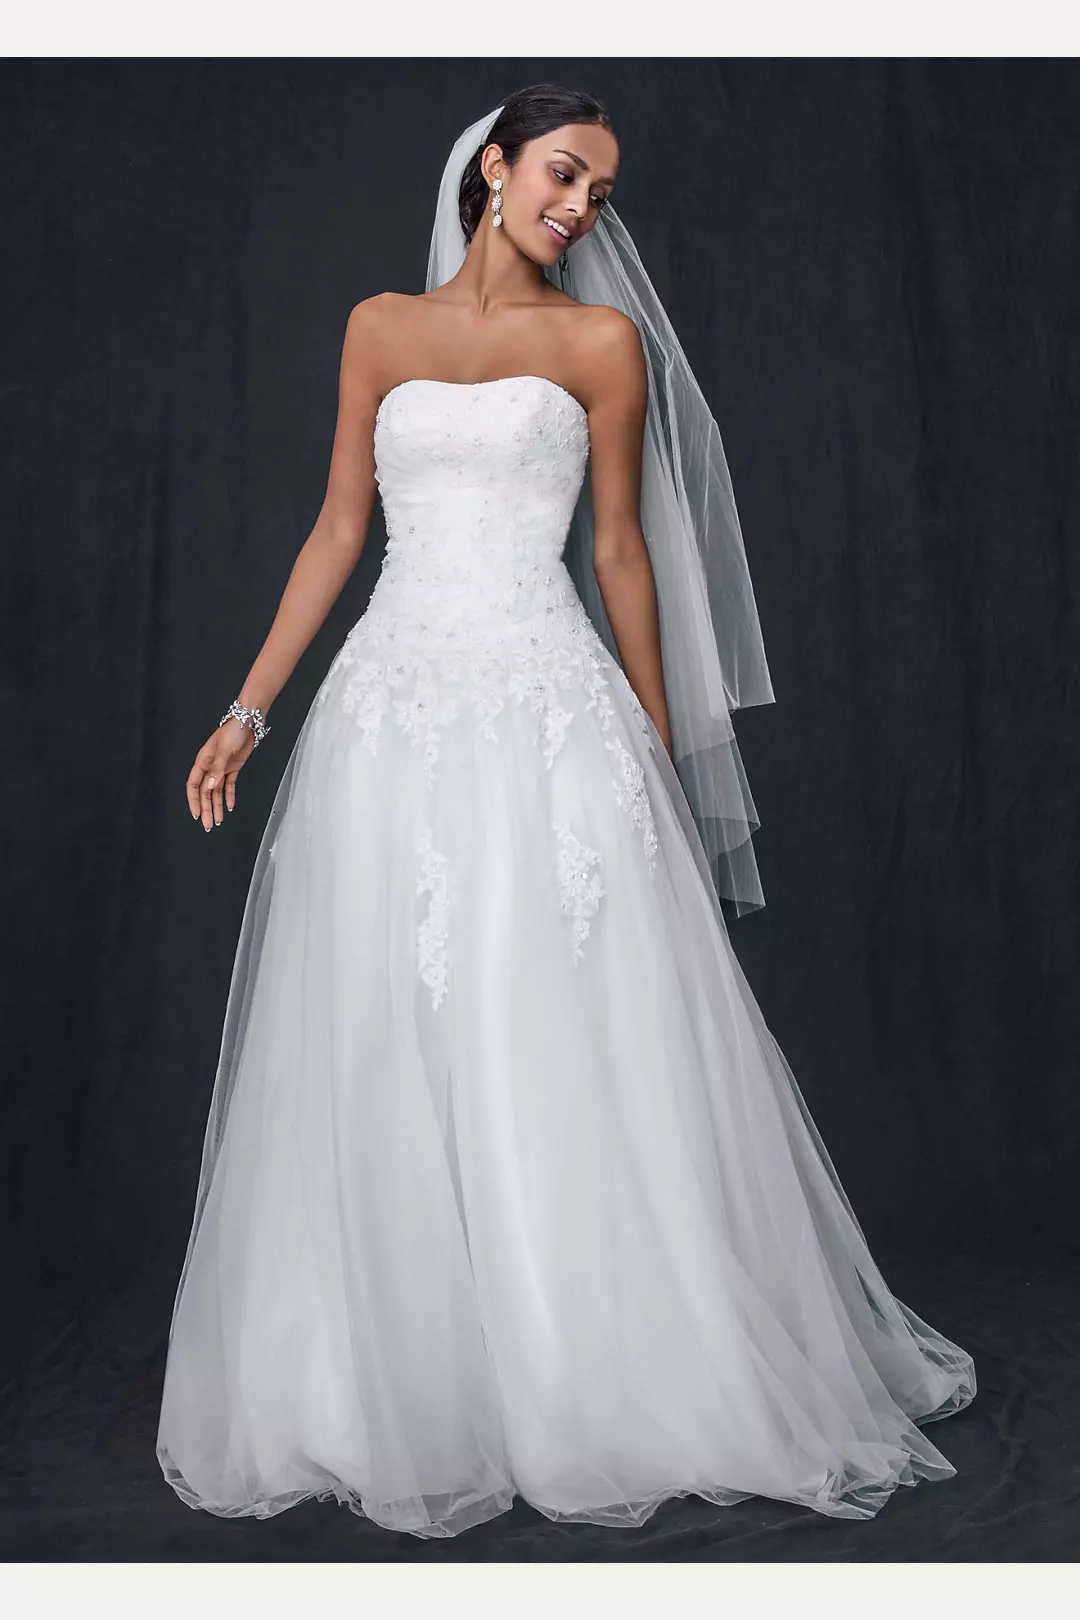 Strapless Lace A-line Wedding Dress A-line Wedding Dress Tulle